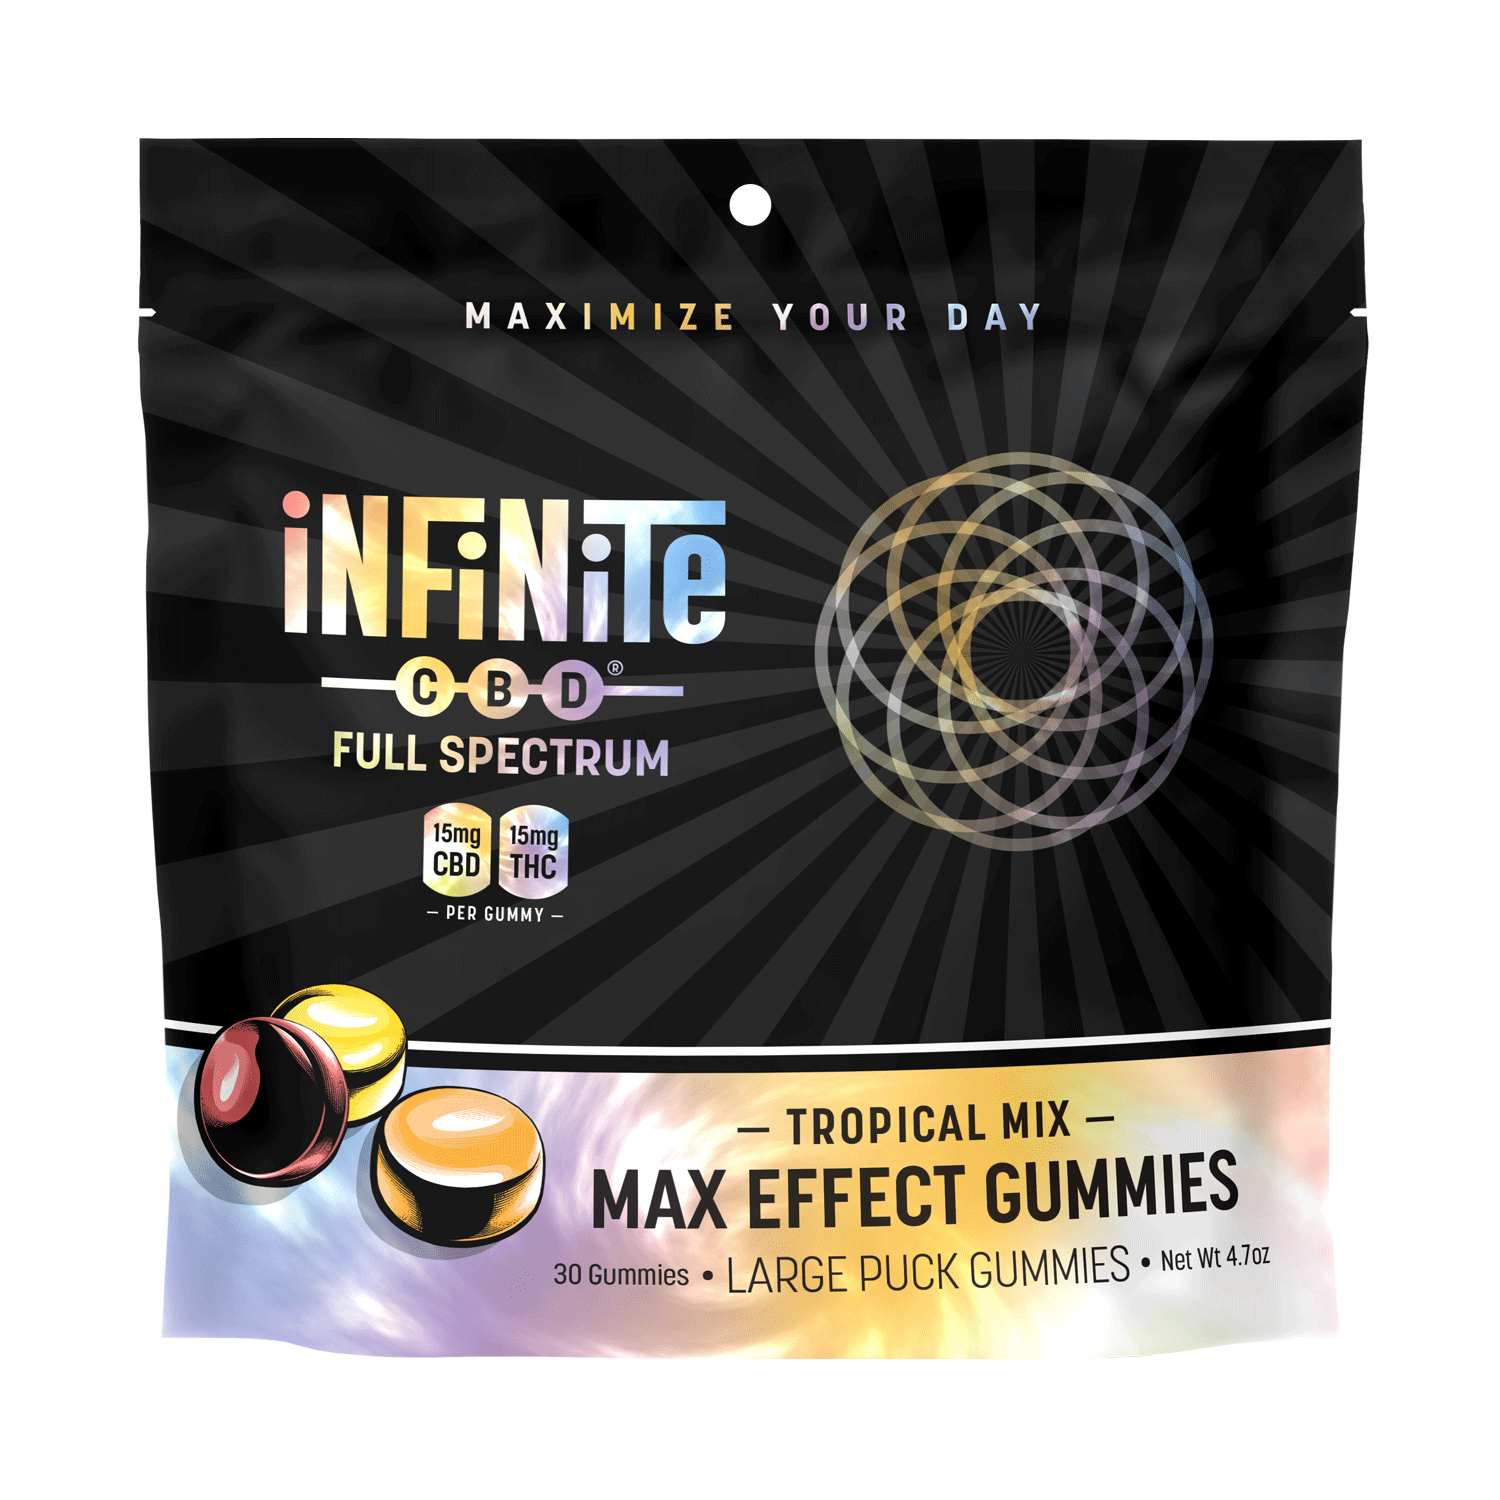 Gummies<br>Formulation: Max Effect<br>CBD: Full Spectrum (Contains THC)<br>Strength: Extra (15mg/serving)